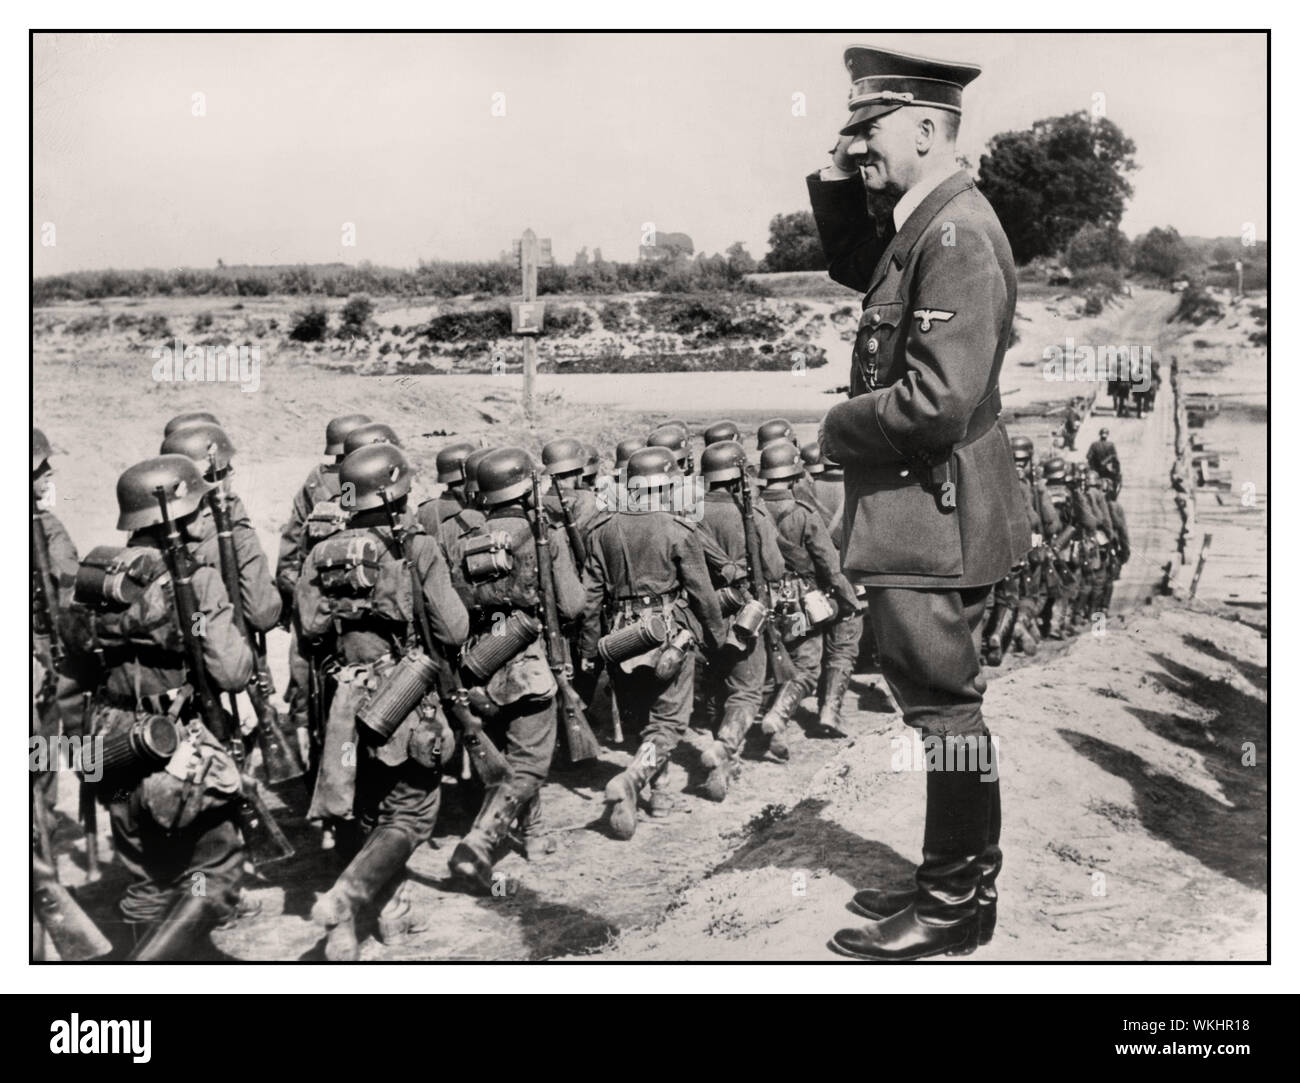 1939 ADOLF HITLER SALUTE GERMAN INVASION OCCUPATION  POLAND Adolf Hitler saluting advancing marching invasion WW2 image of German Wehrmacht  soldiers troops during occupation of Poland WW2 Stock Photo